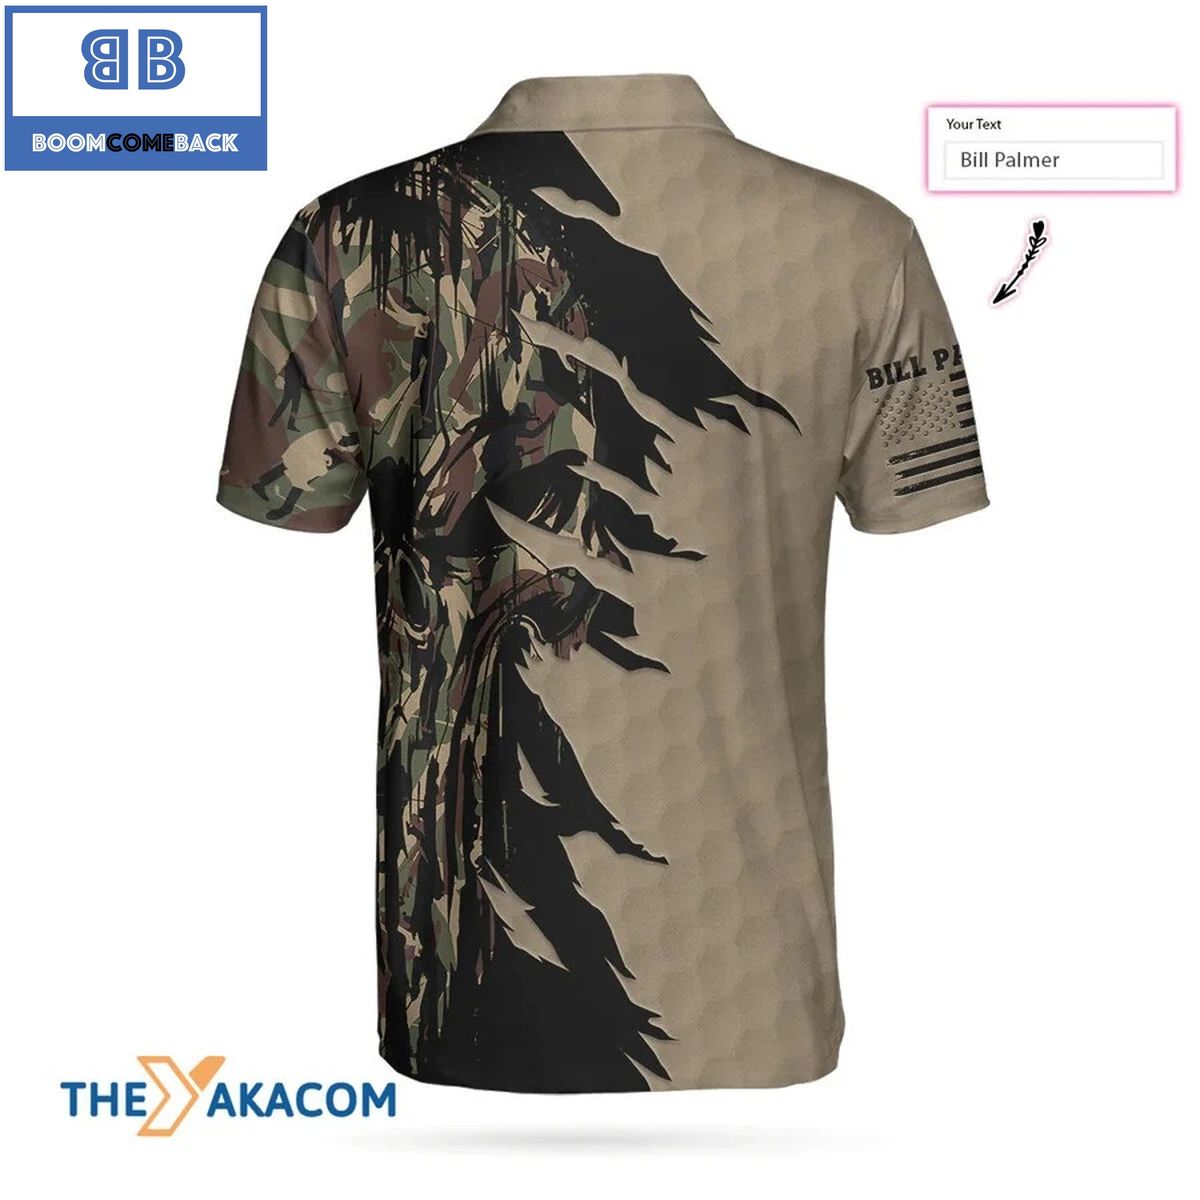 Personalized2BGolf2BRipped2BVintage2BGolfing2BClubs2BCamouflaged2BAthletic2BCollared2BMens2BPolo2BShirt2B4 aejur